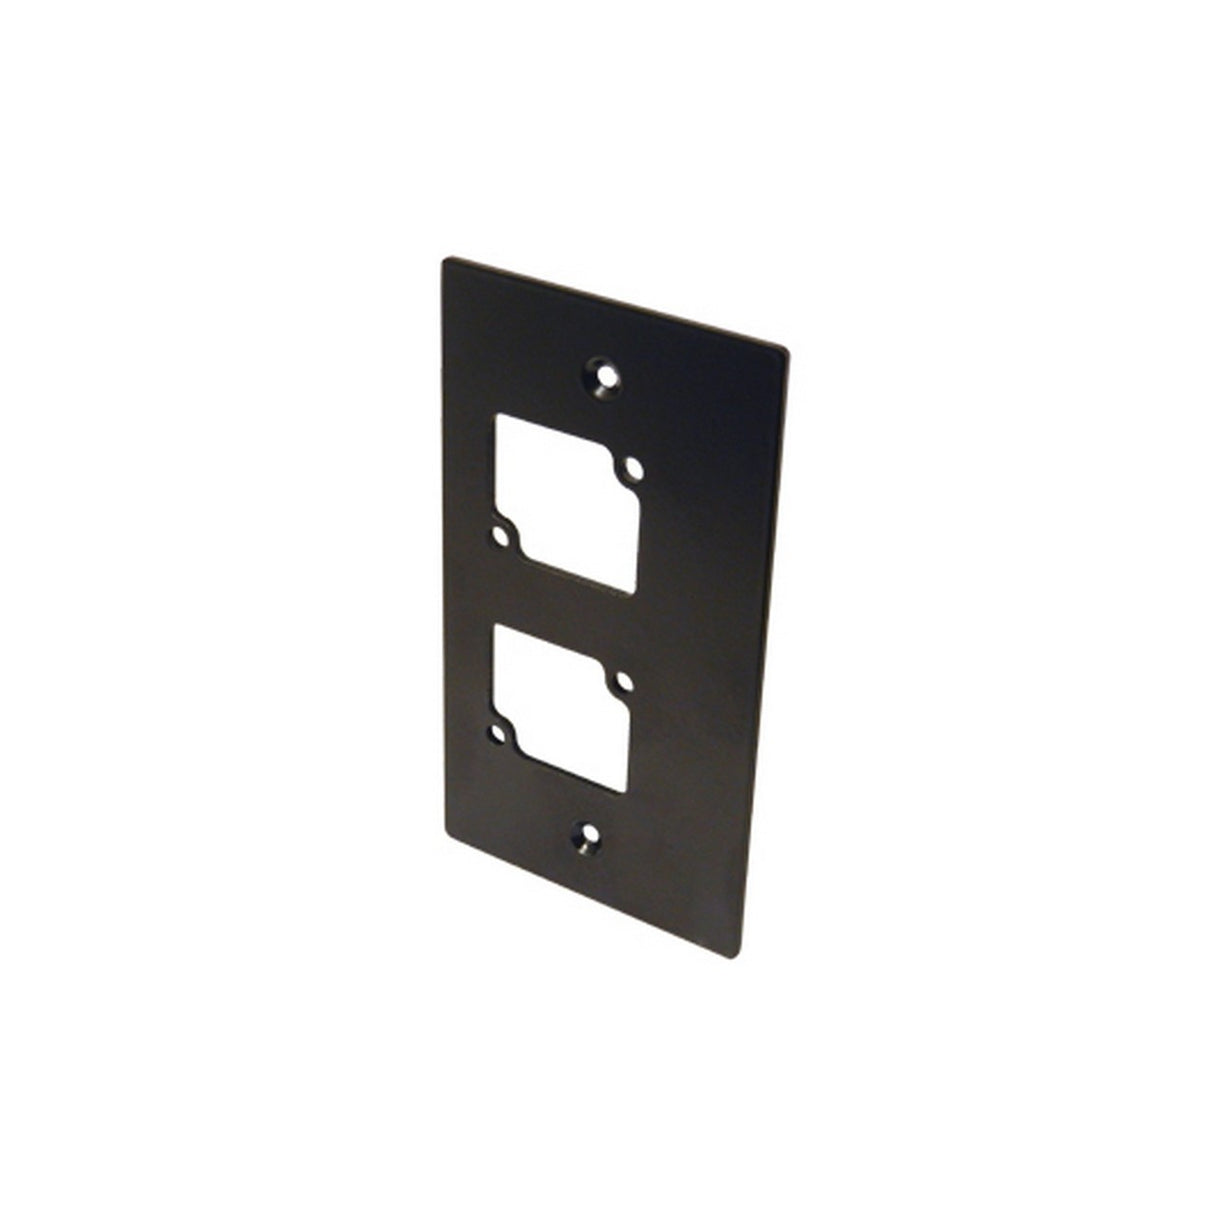 Ace Backstage Co. DSO speakON Panel for Electrical Raceway Brackets in Super Pockets (Used)